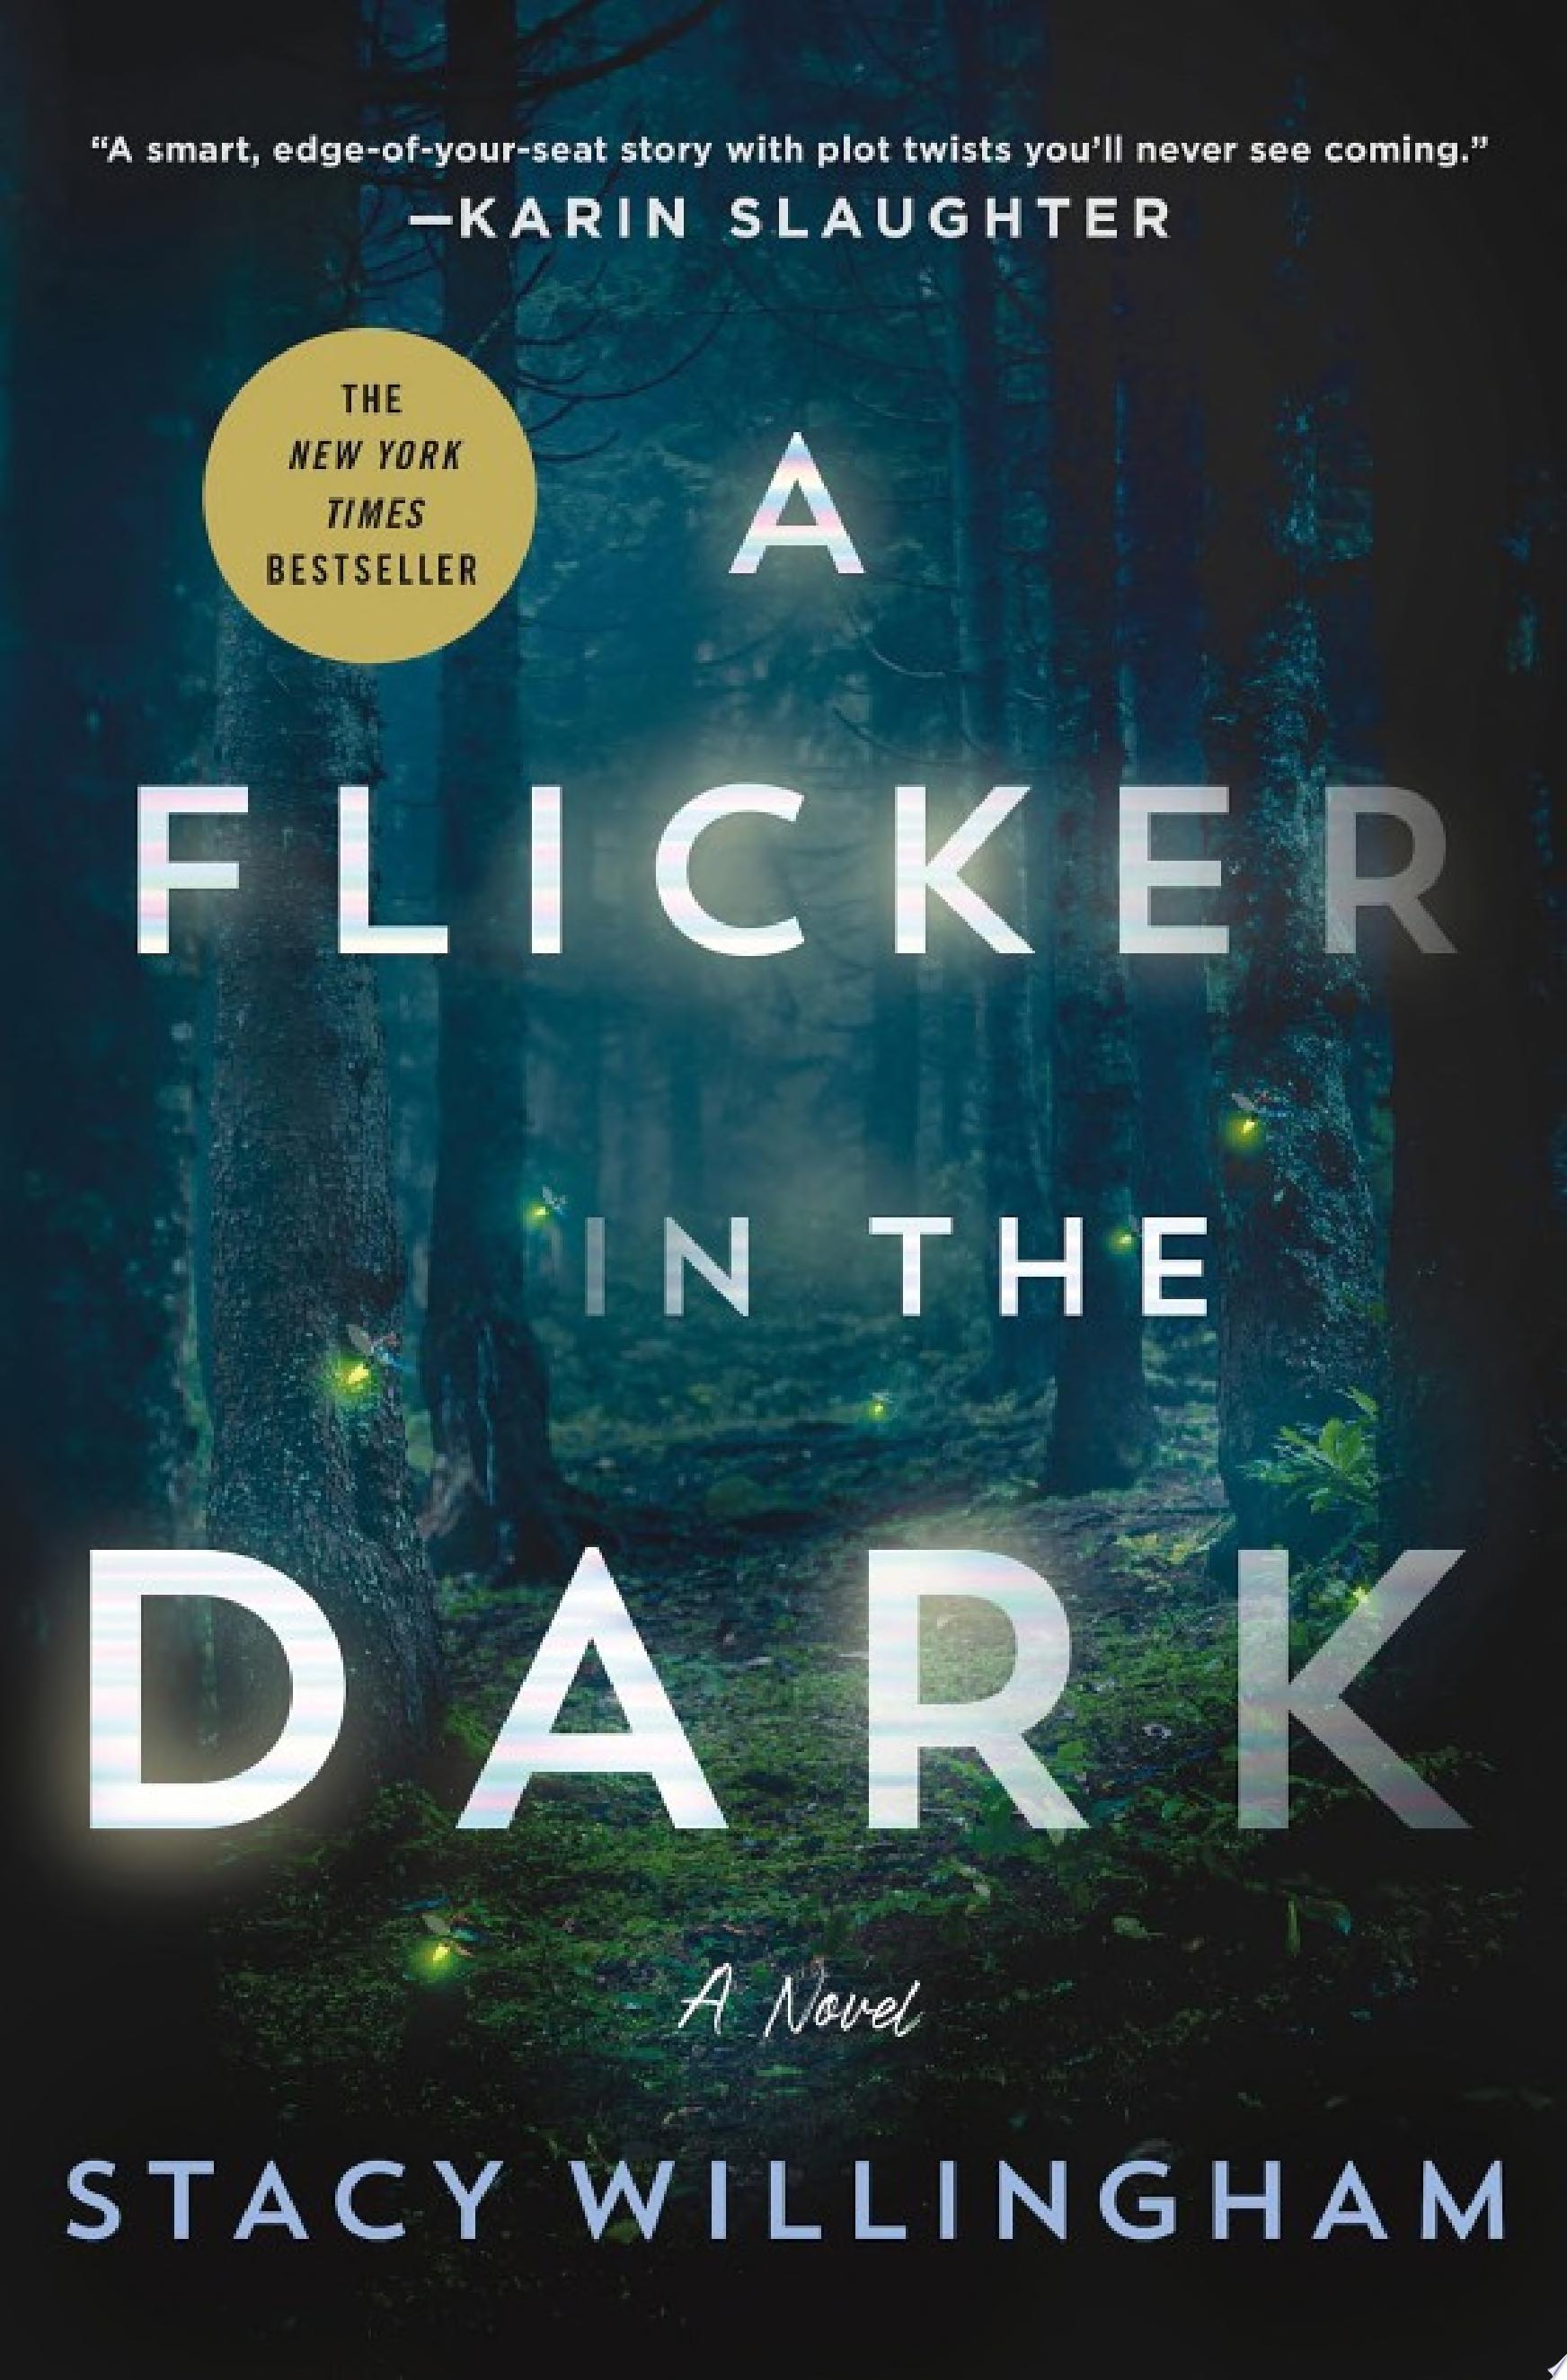 Image for "A Flicker in the Dark"